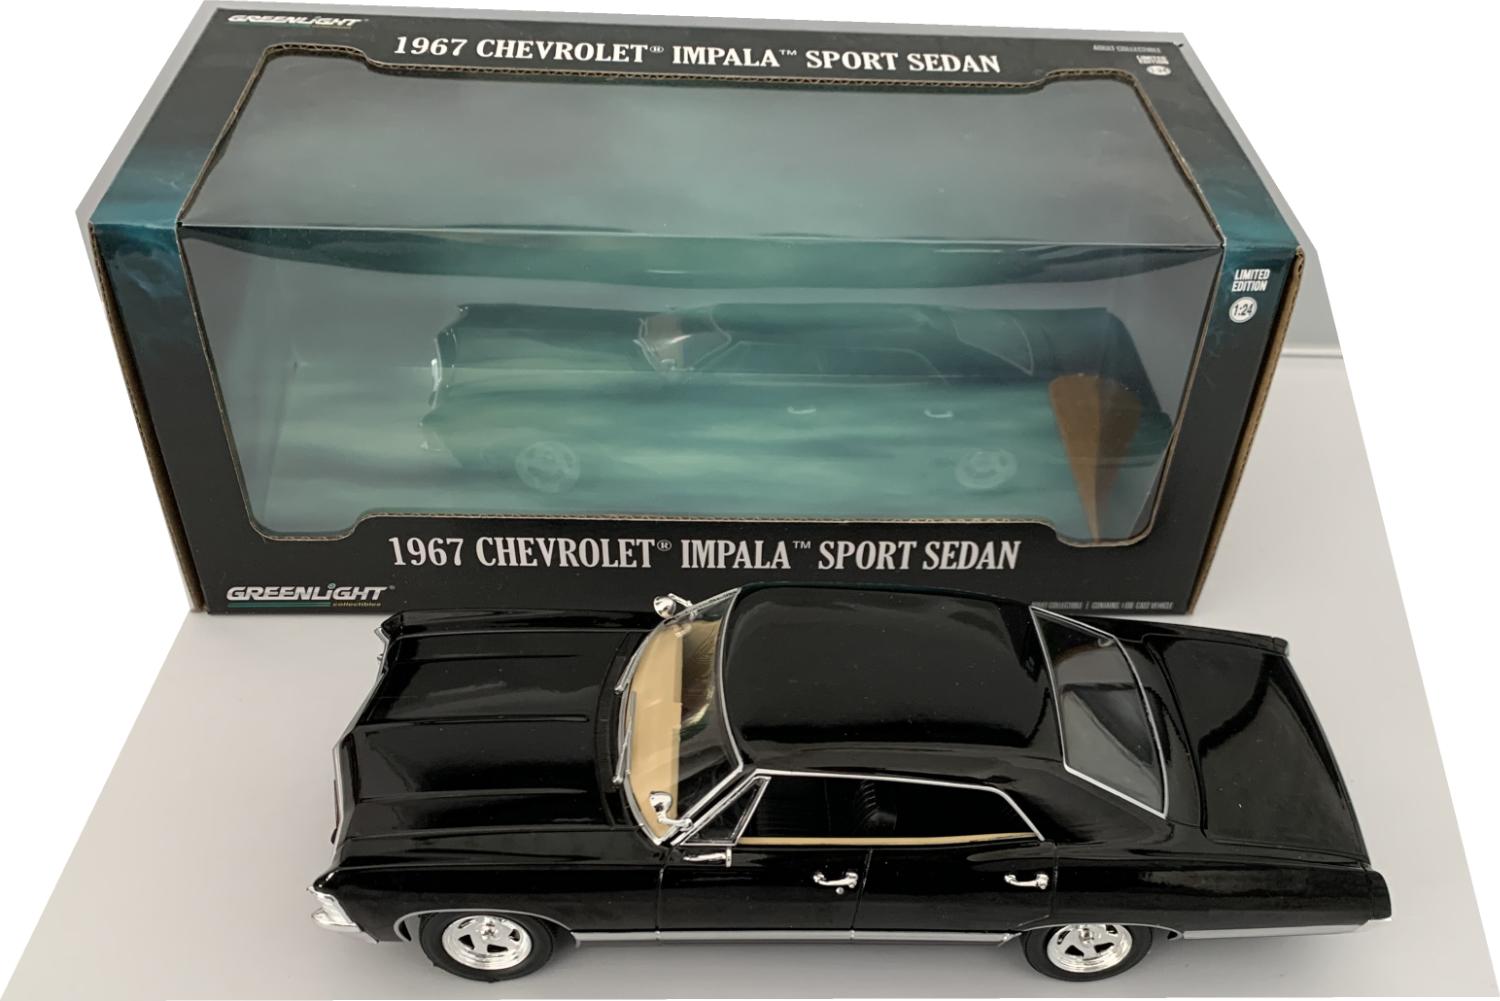 Chevrolet Impala Sport Sedan with detail throughout, all authentically recreated.  The model is presented in a window display box, the car is approx. 22.5 cm long and the box is 26 cm long.  Limited Edition